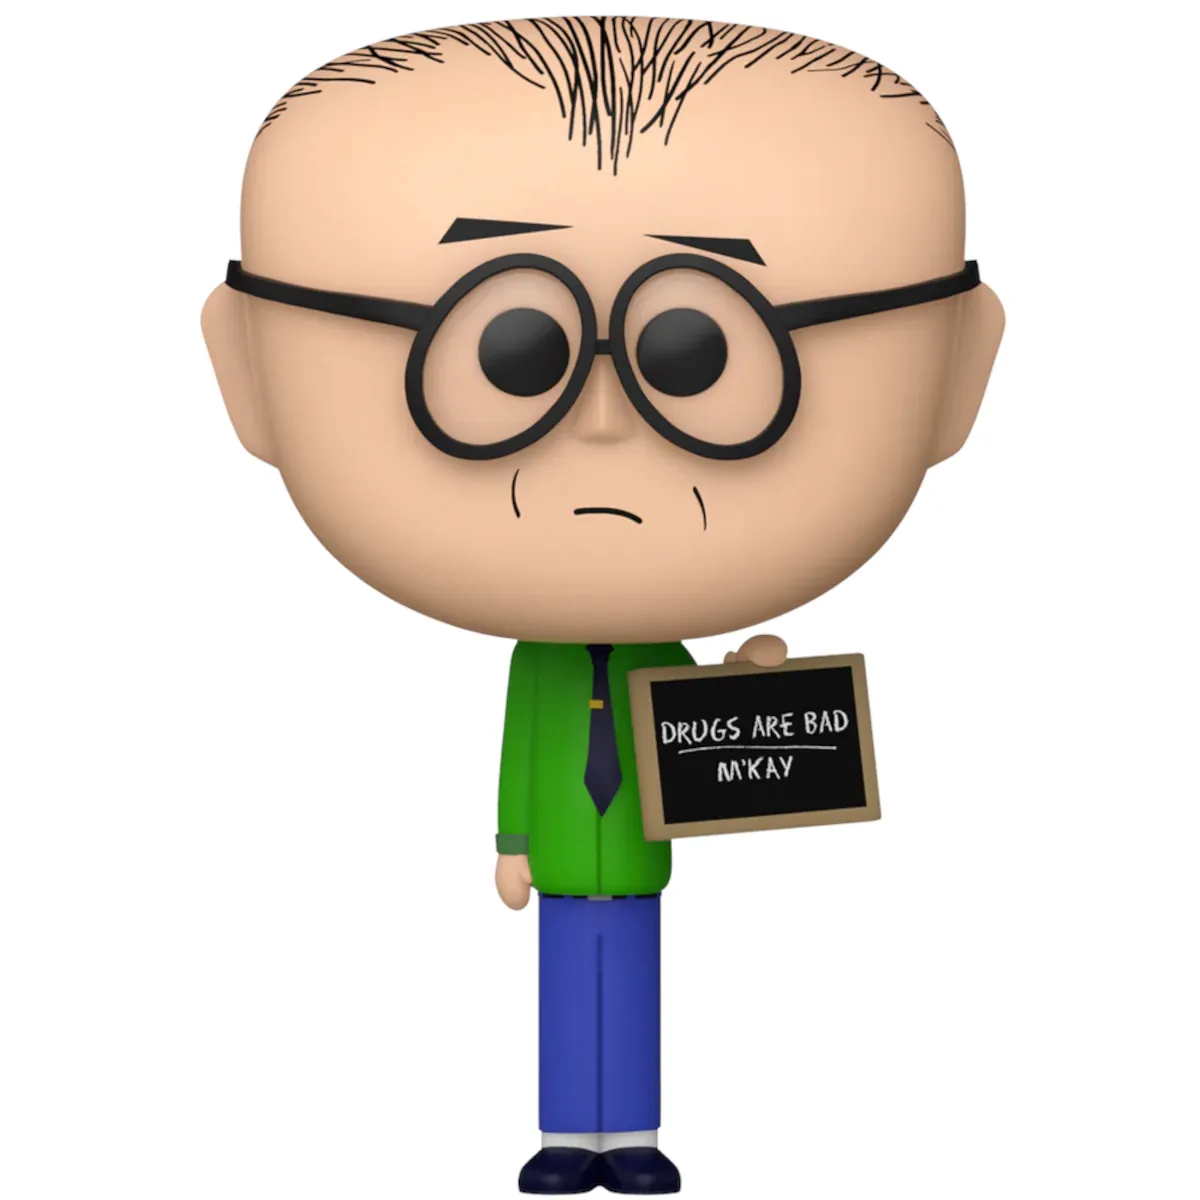 FK75672 Funko Pop! Television - South Park - Mr Mackey Collectable Vinyl Figure